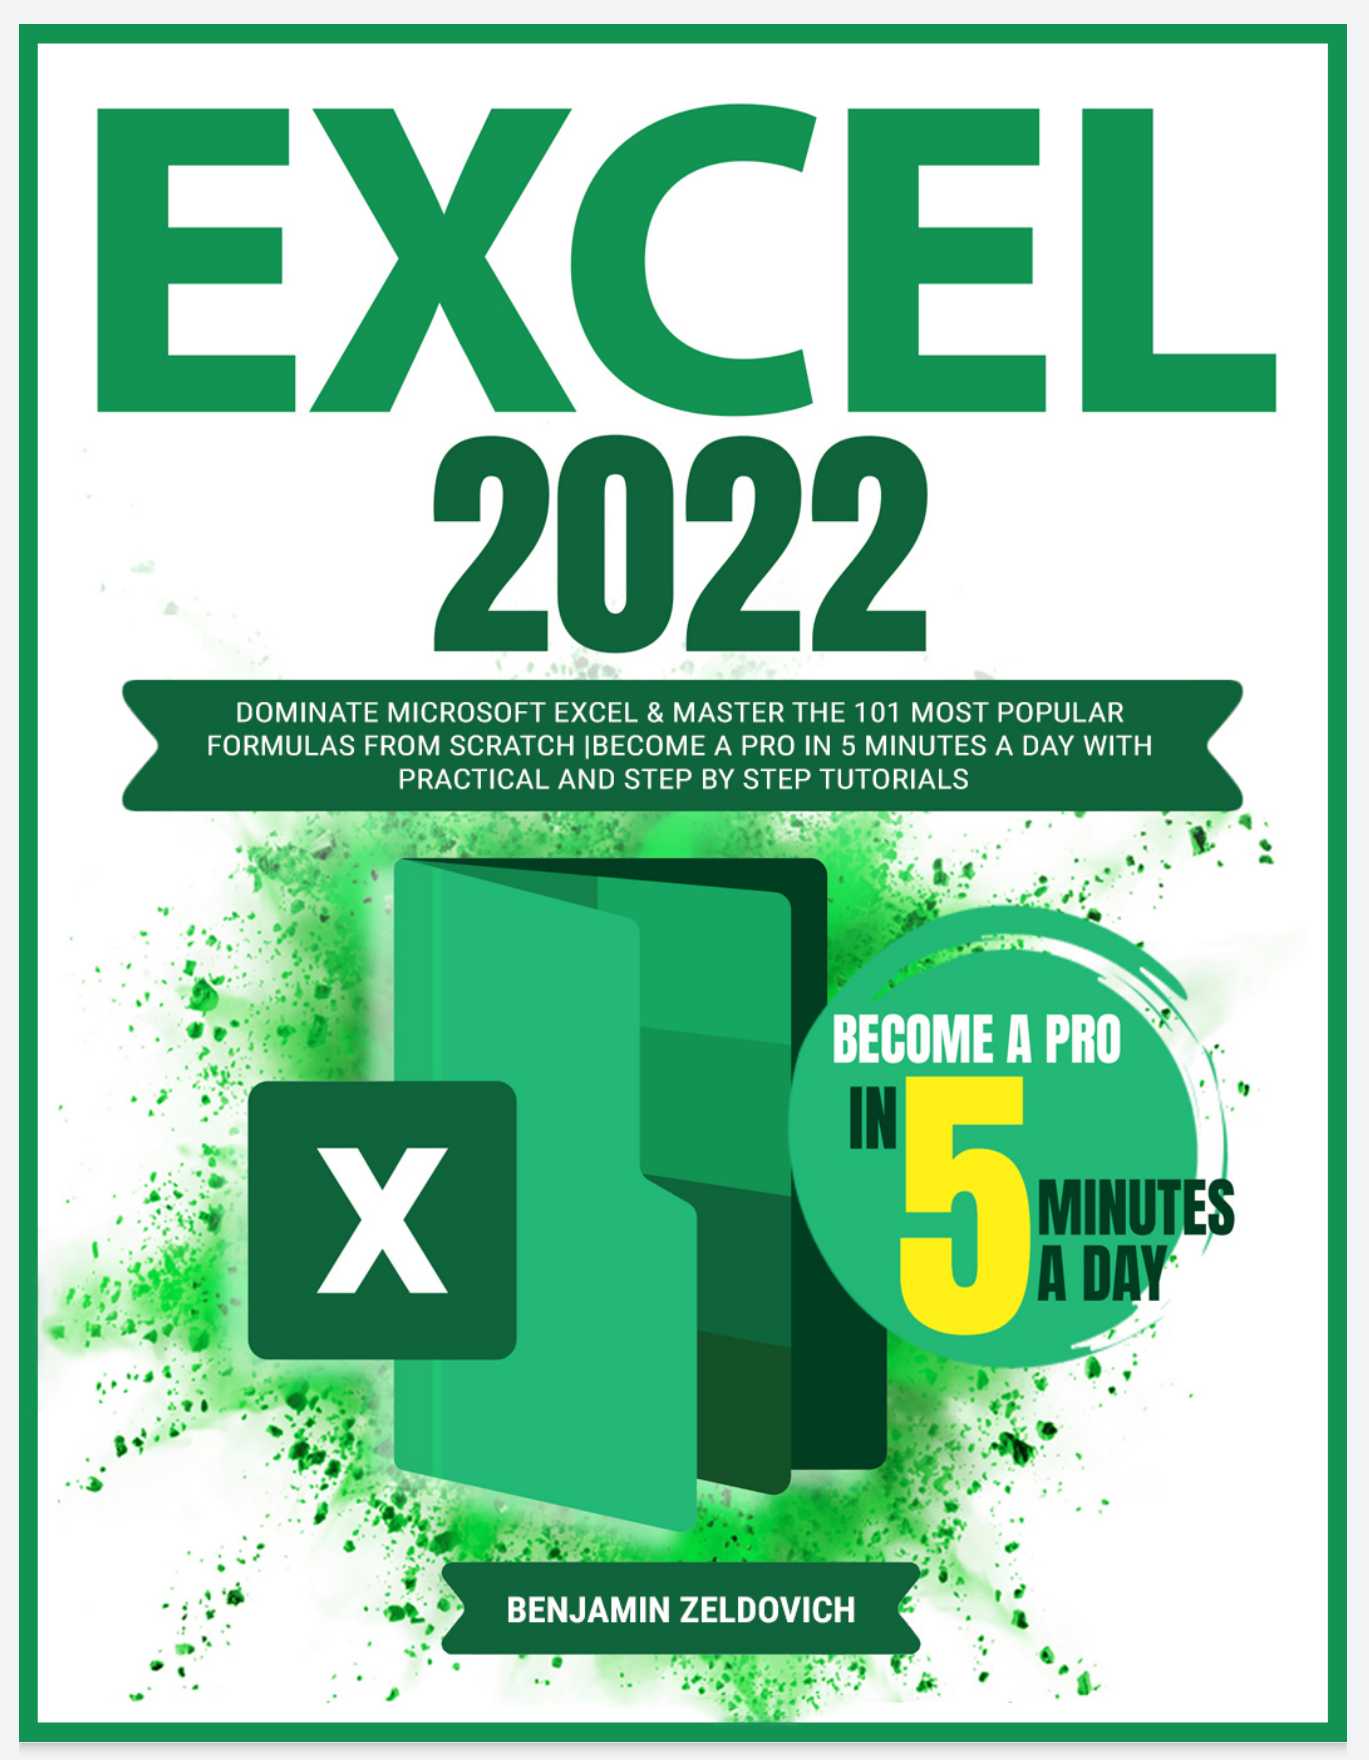 Excel 2022: Dominate Microsoft Excel & Master the 101 Most Popular Formulas from Scratch PDF